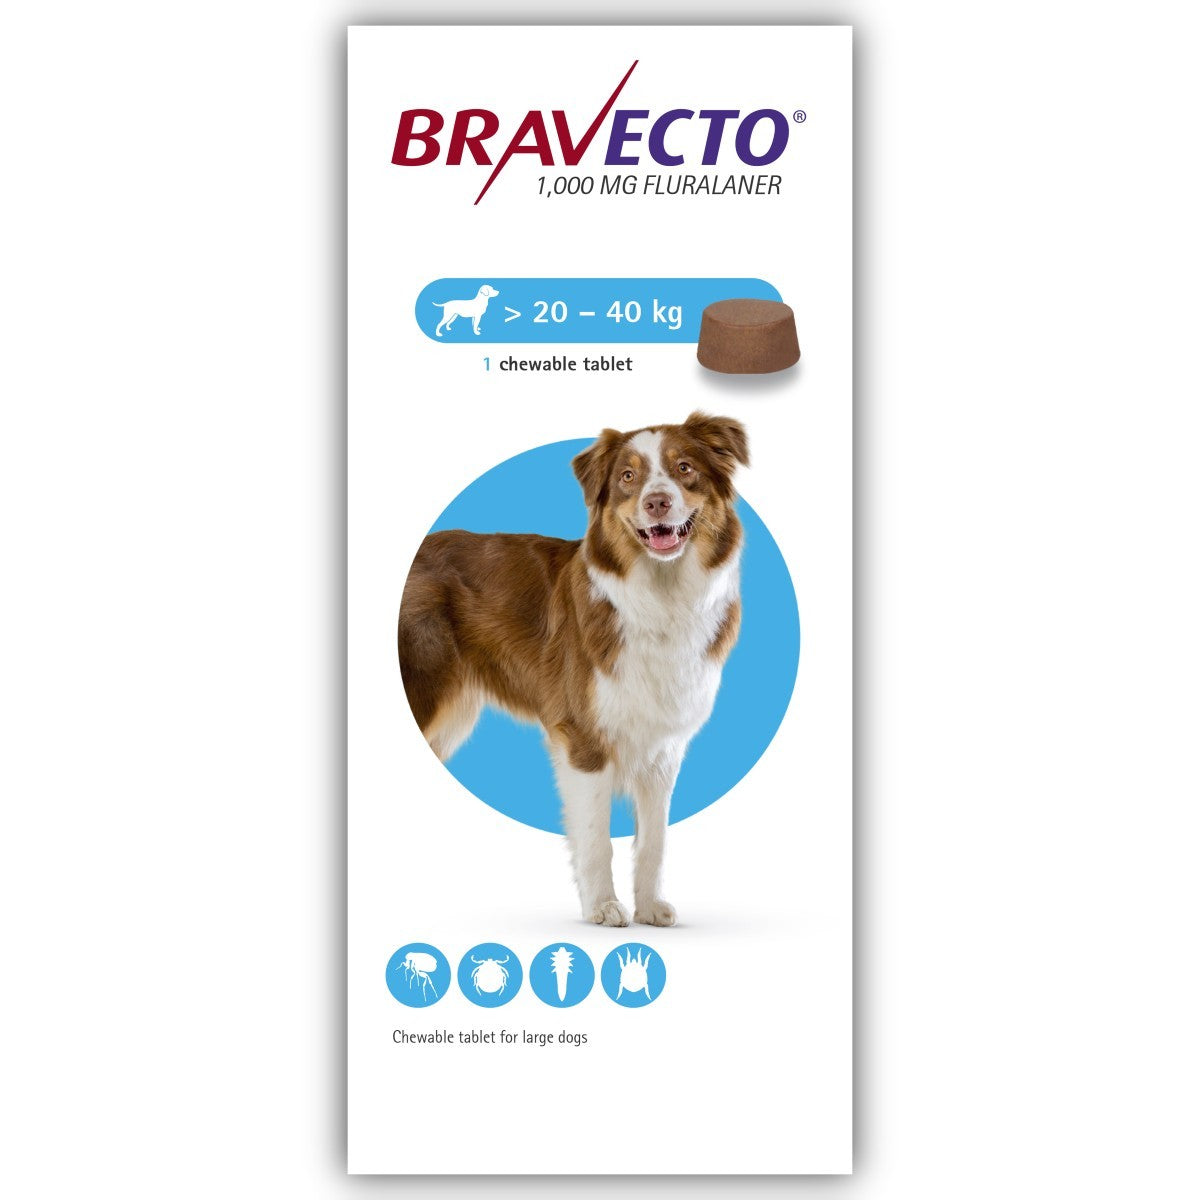 BRAVECTO 1000 mg CHEWABLE TABLETS LARGE DOGS 20-40 Kg